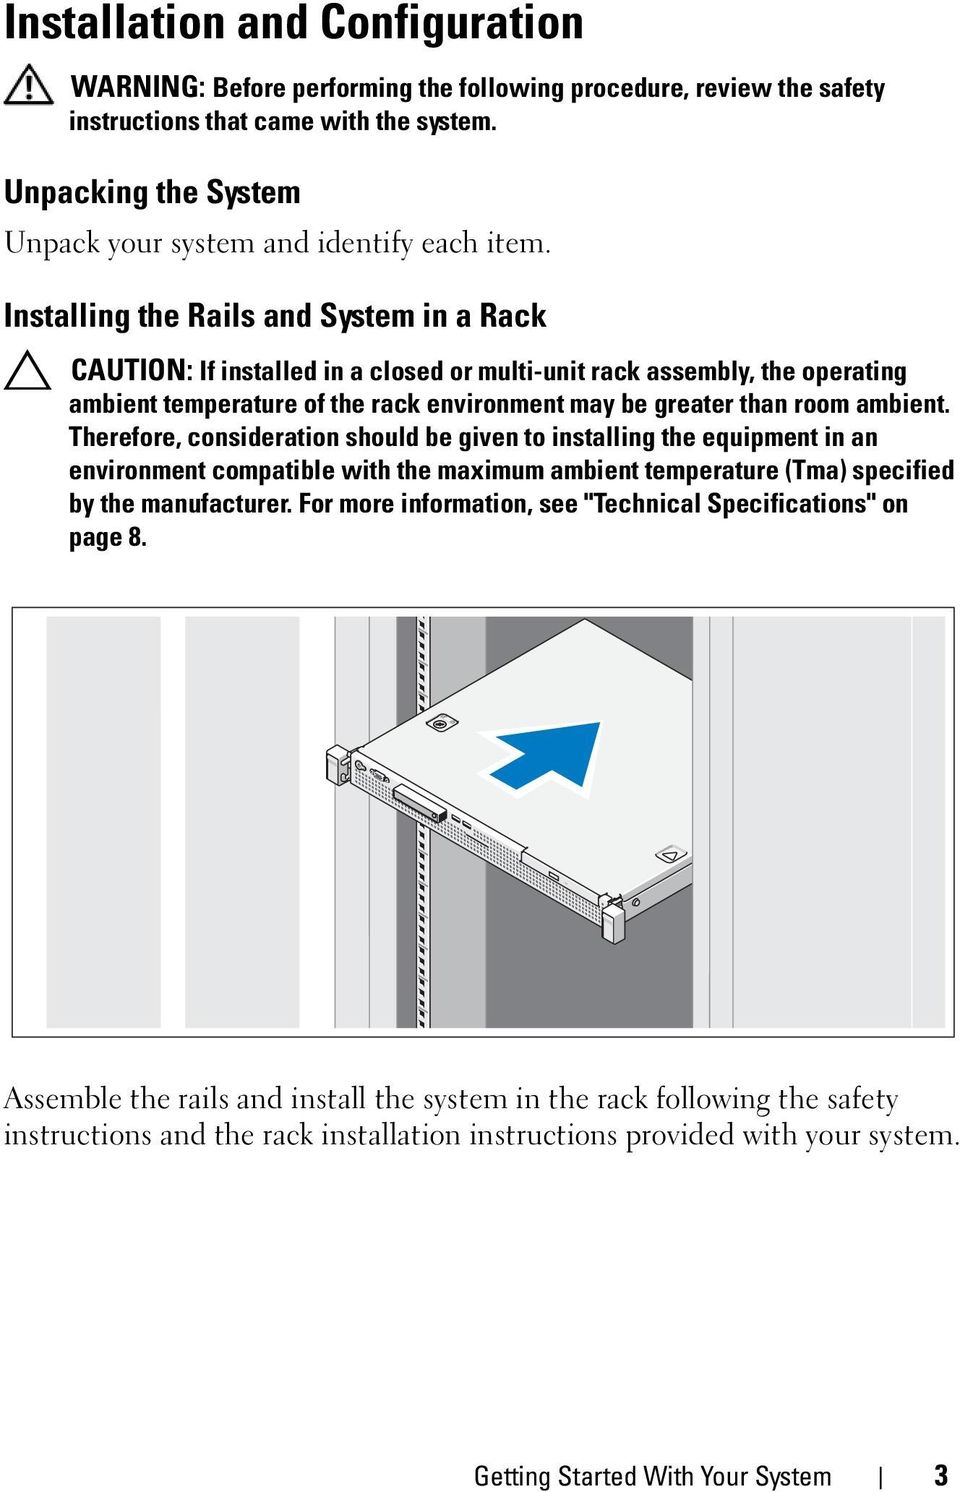 Installing the Rails and System in a Rack CAUTION: If installed in a closed or multi-unit rack assembly, the operating ambient temperature of the rack environment may be greater than room ambient.